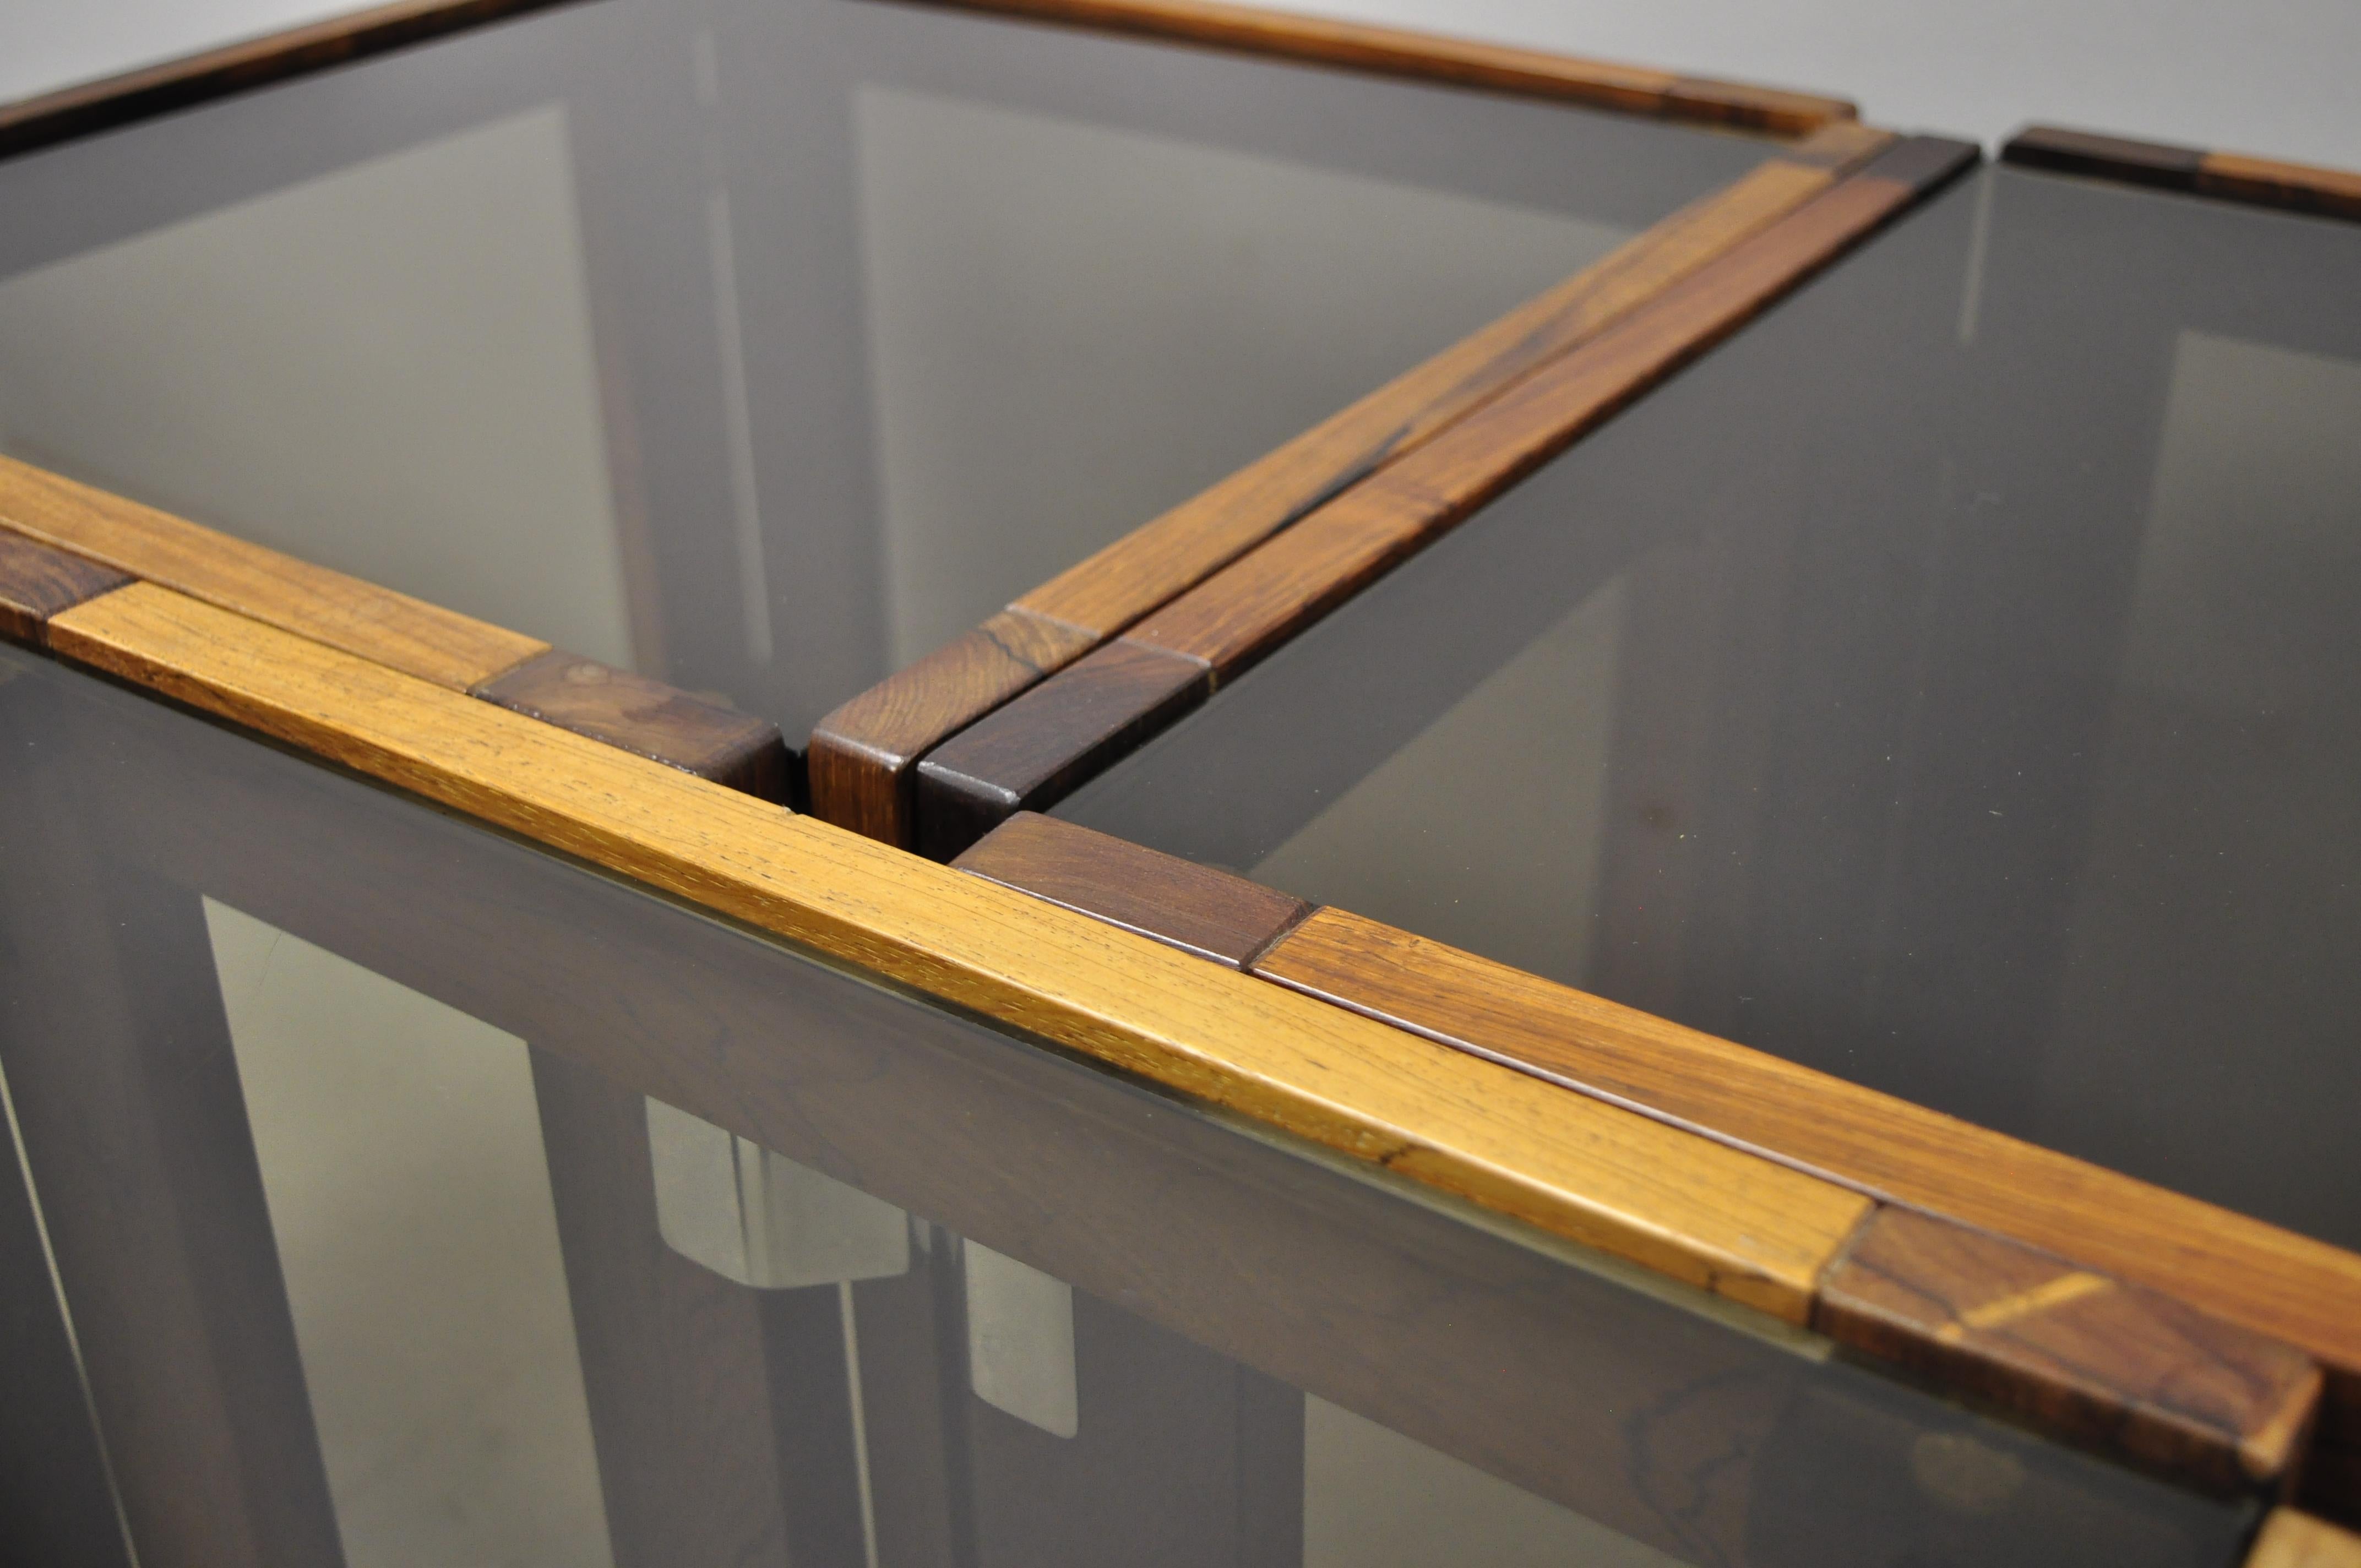 3 Midcentury Danish Modern Rosewood & Smoked Glass Side Tables by Interior Form For Sale 1